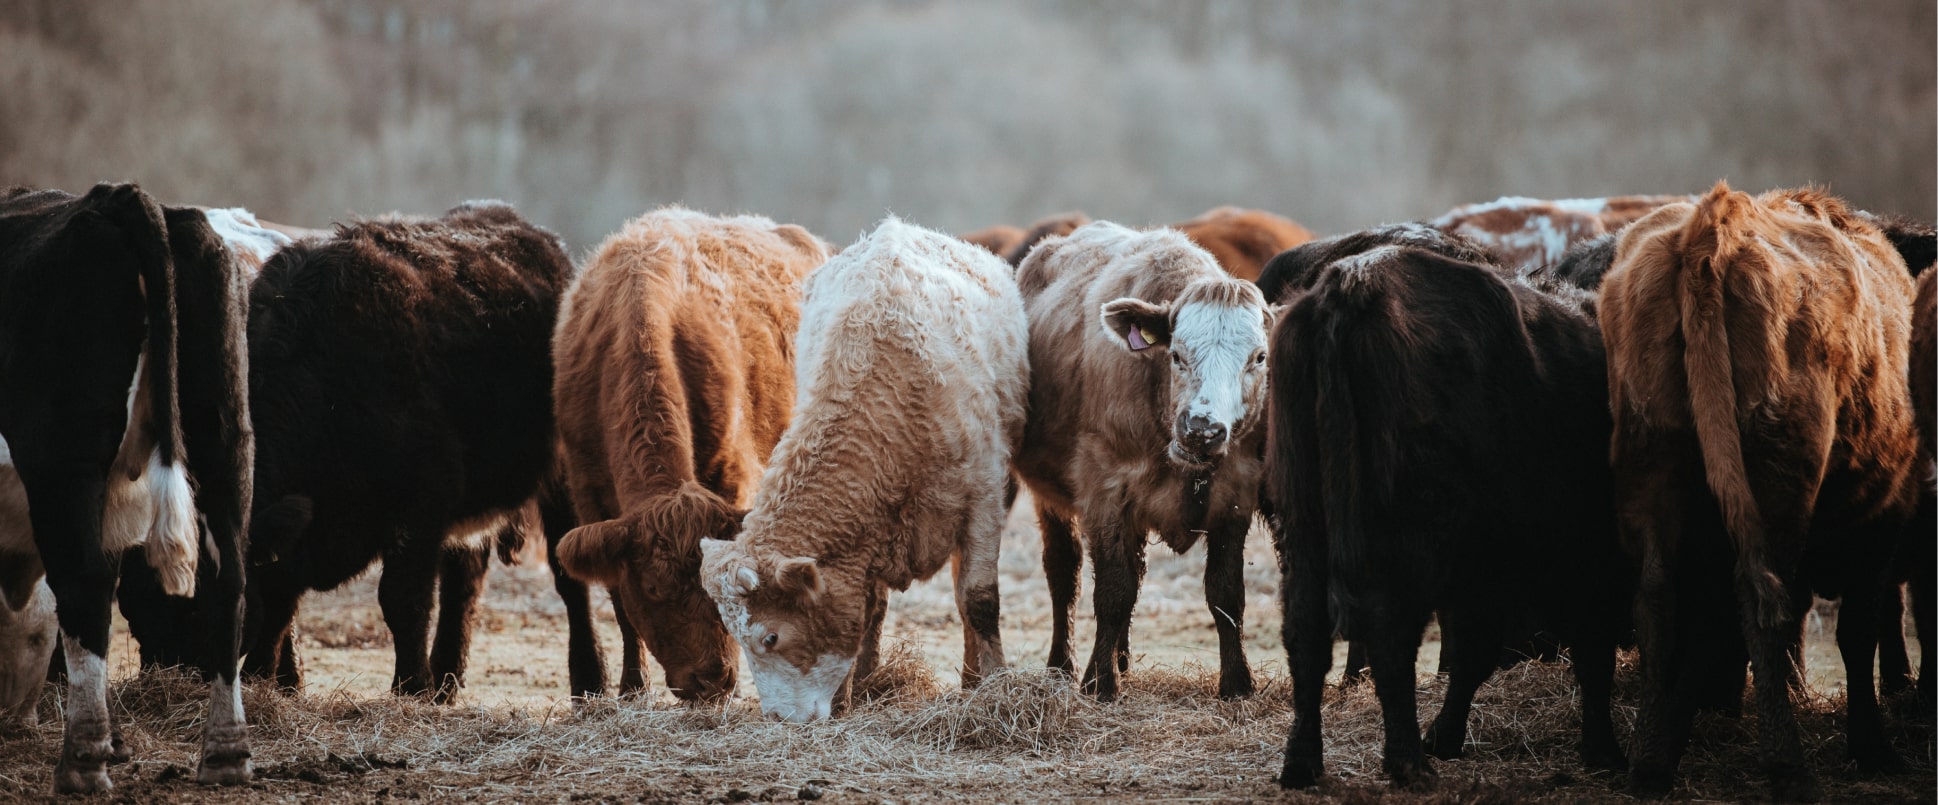 With image categorization, your model can 
                        classify livestock images based on breeds, health conditions, 
                        or specific characteristics, supporting effective livestock 
                        management practices.